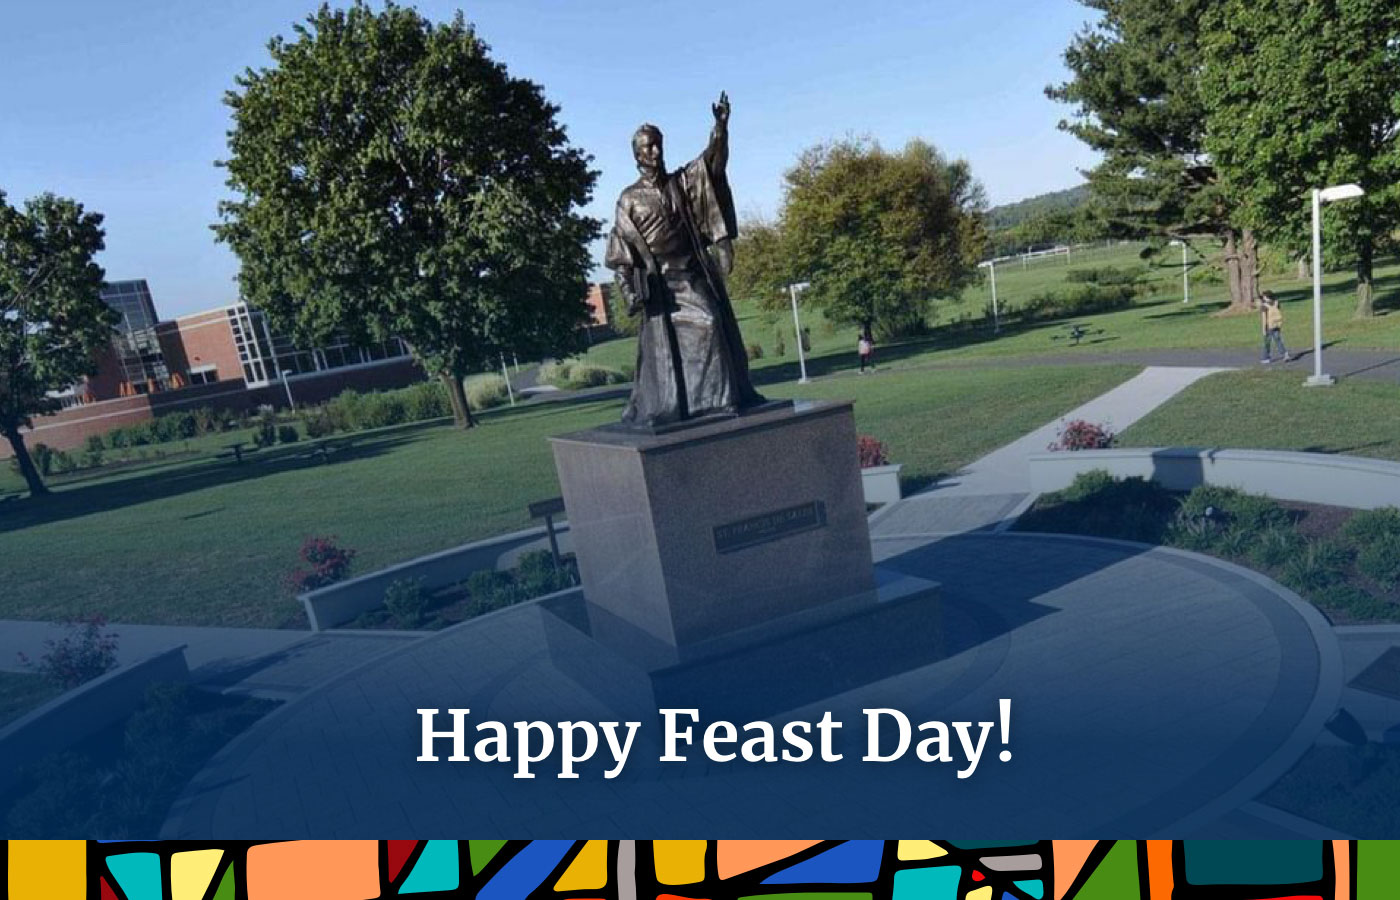 Feast Day